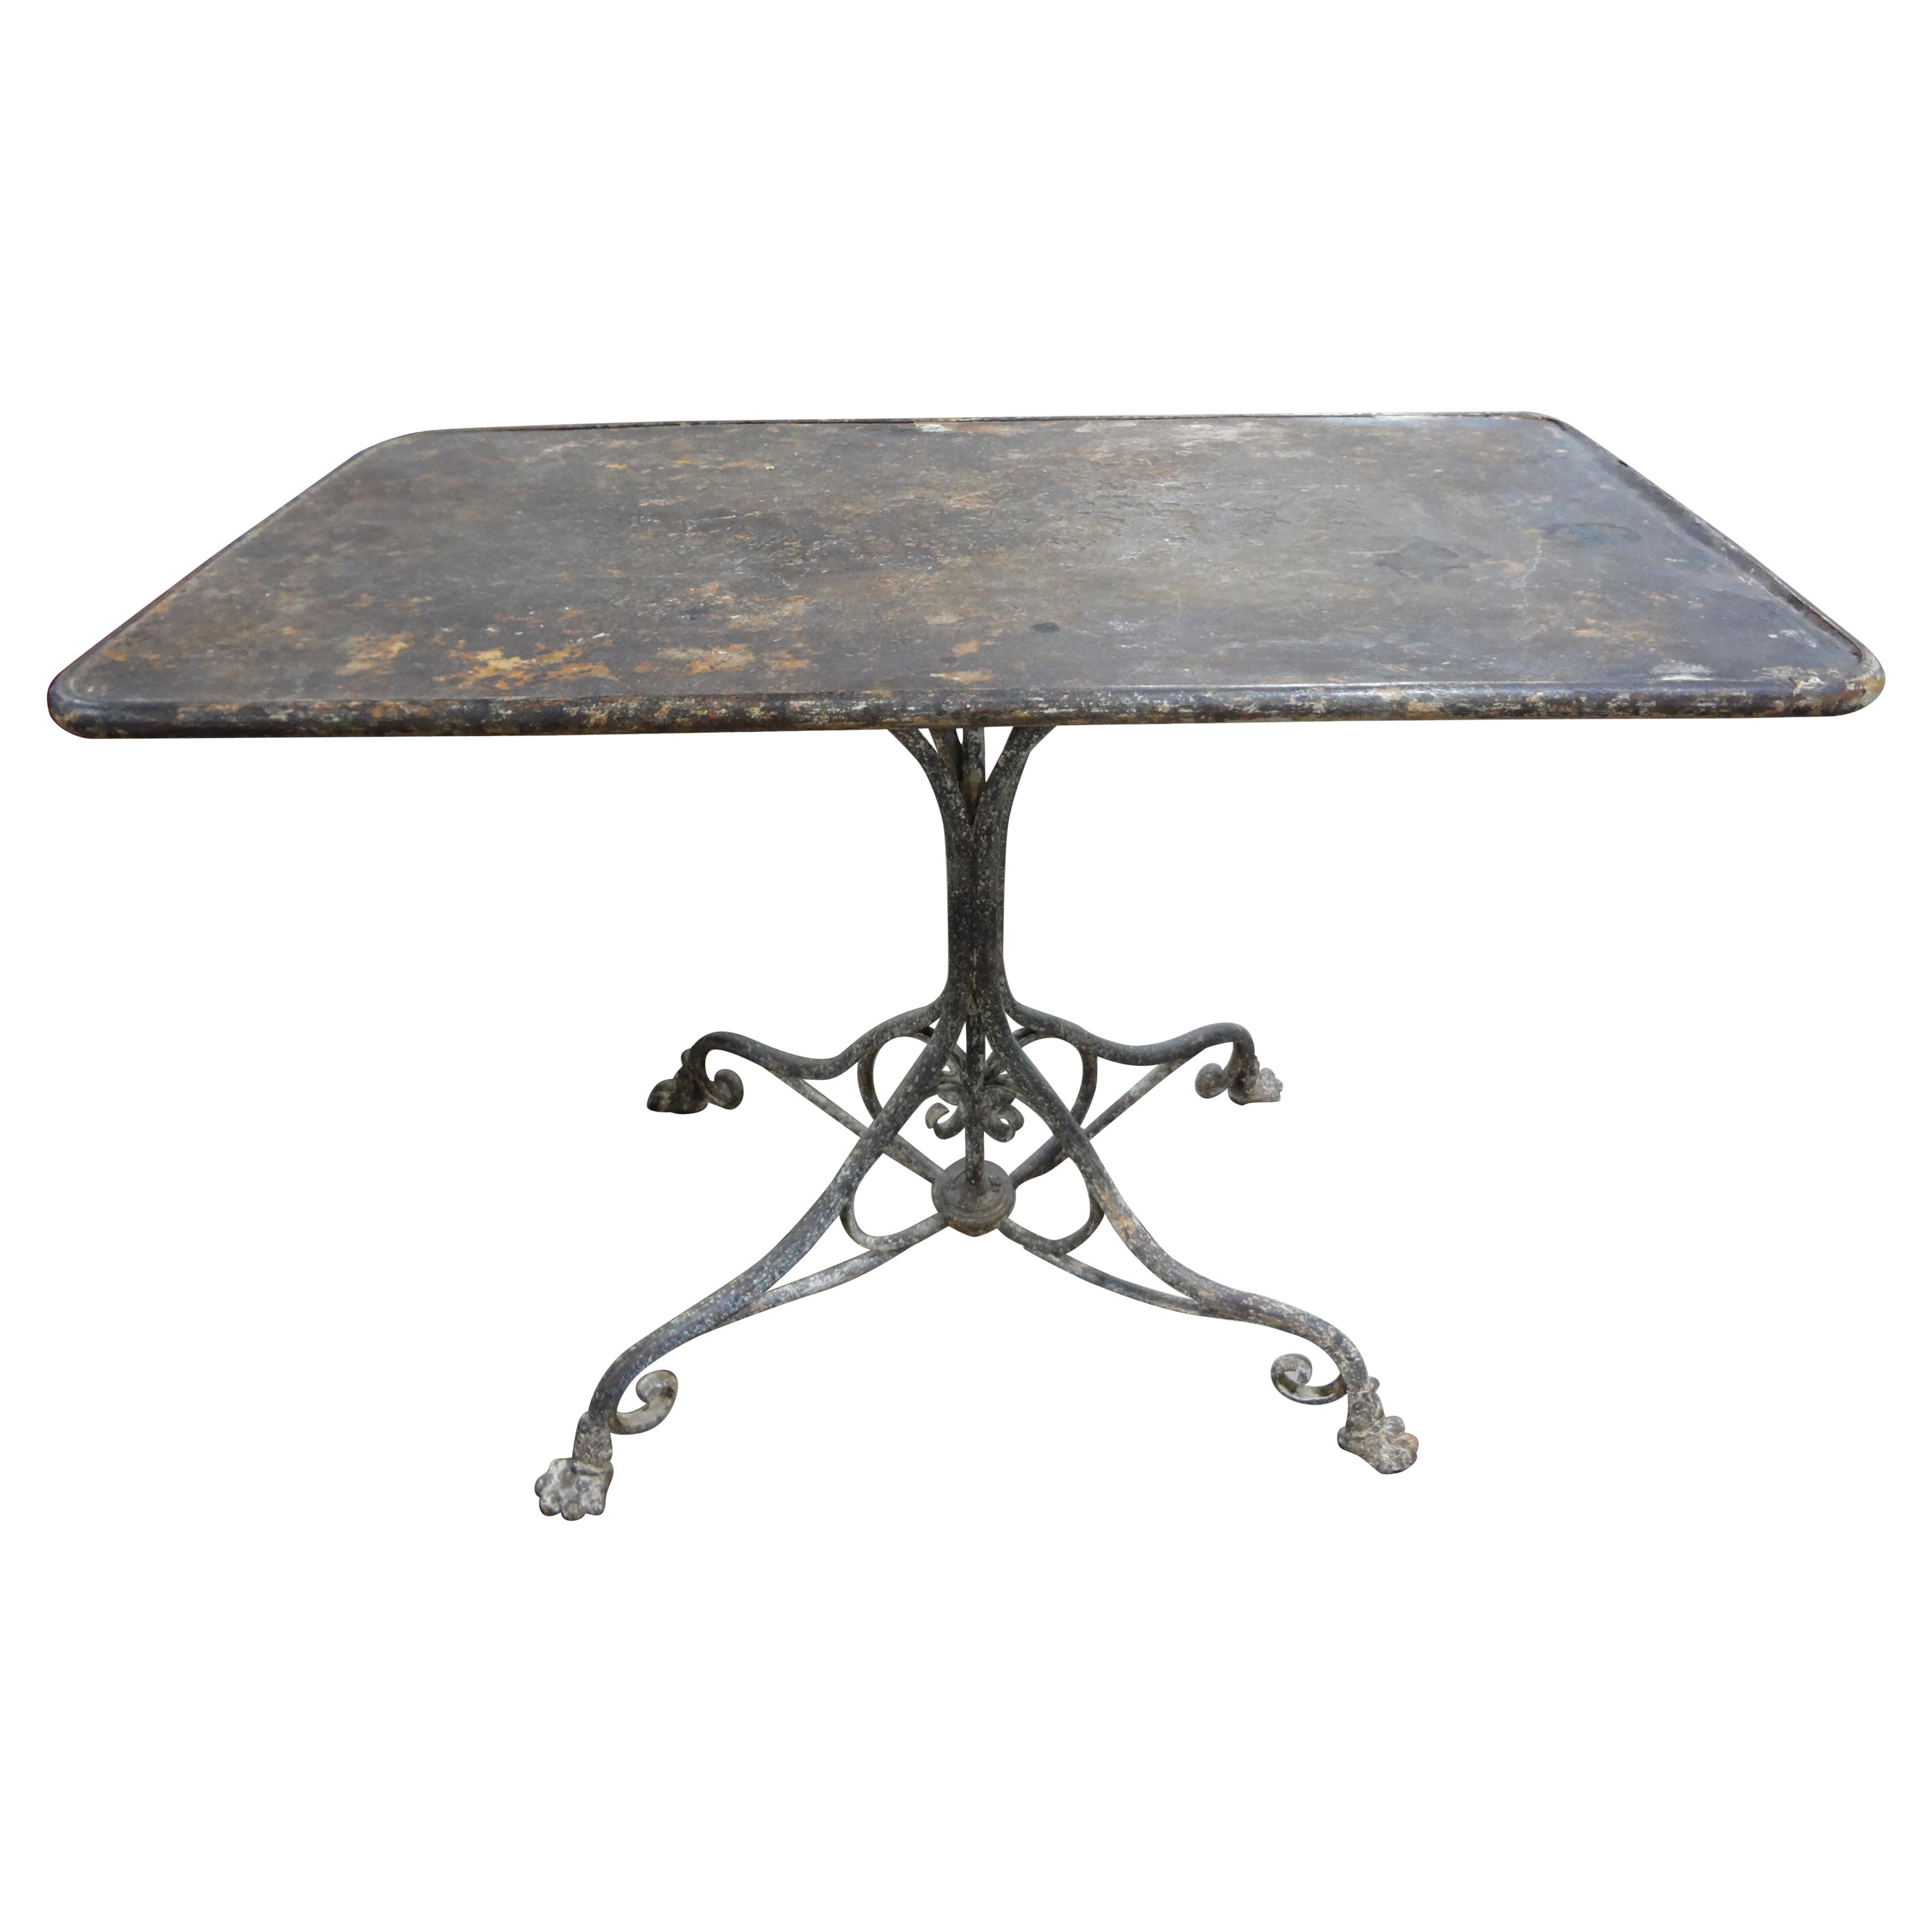 19th Century French Iron Garden Table By Arras